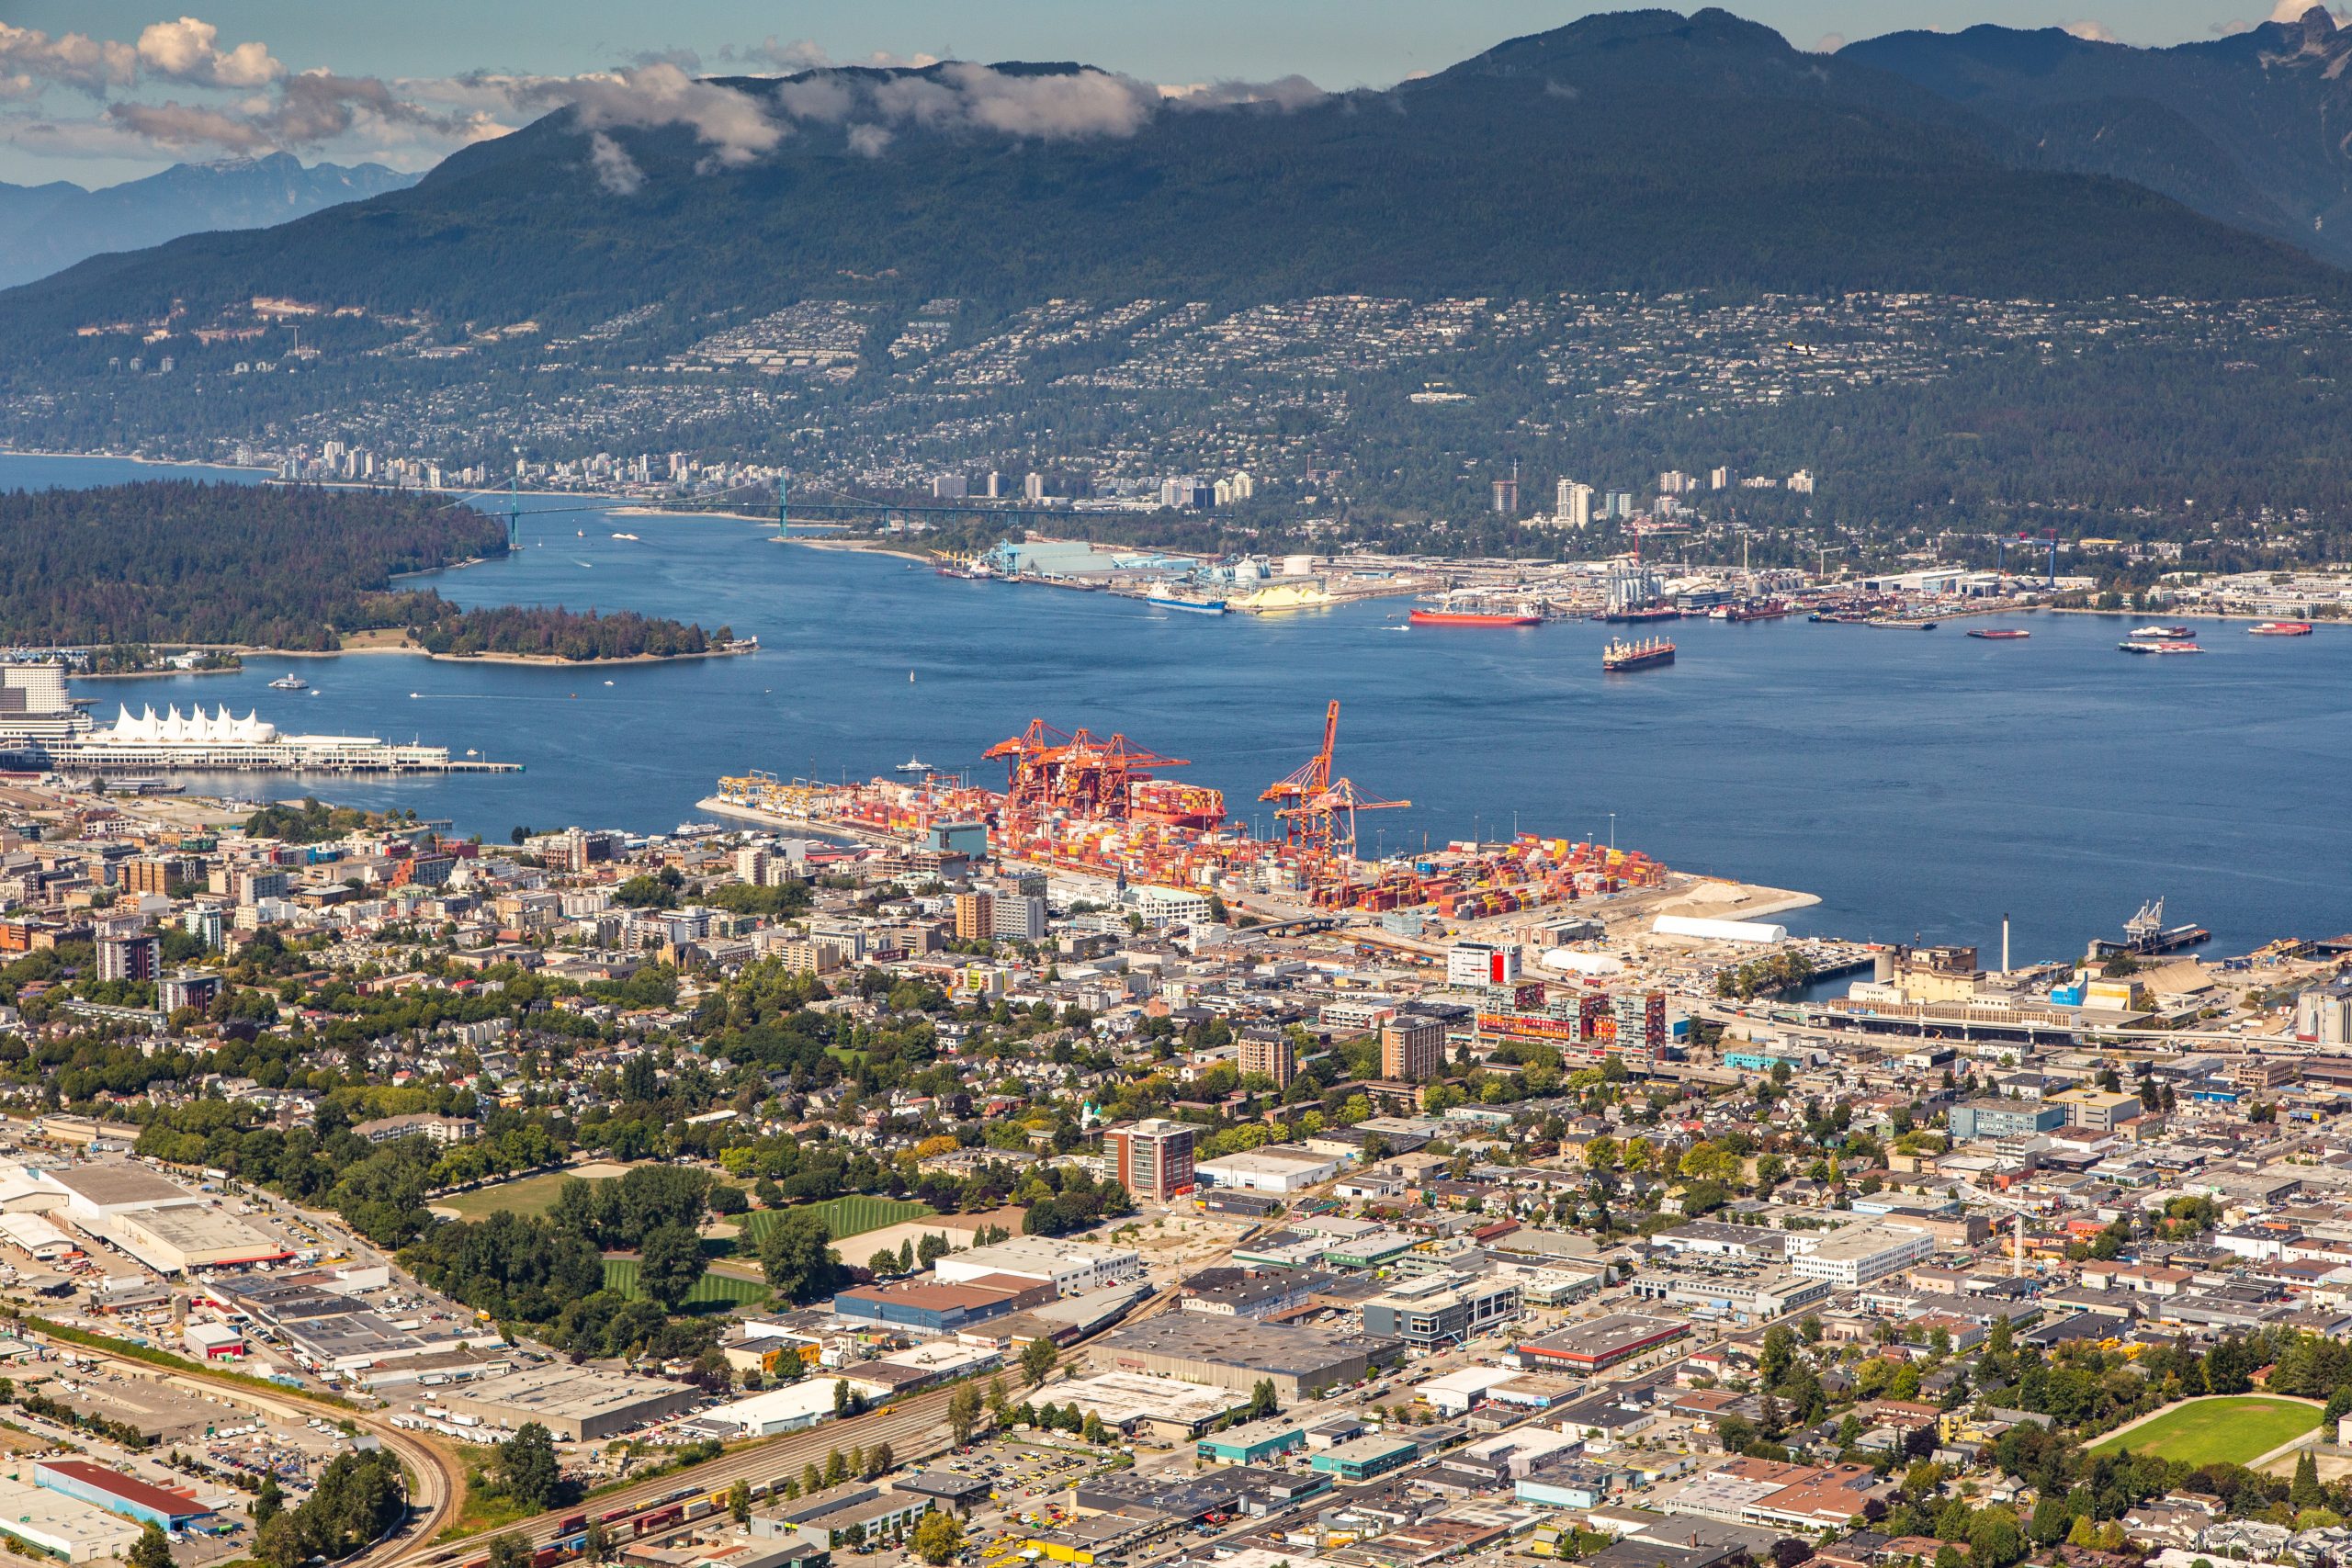 Birdview of the Port of Vancouver